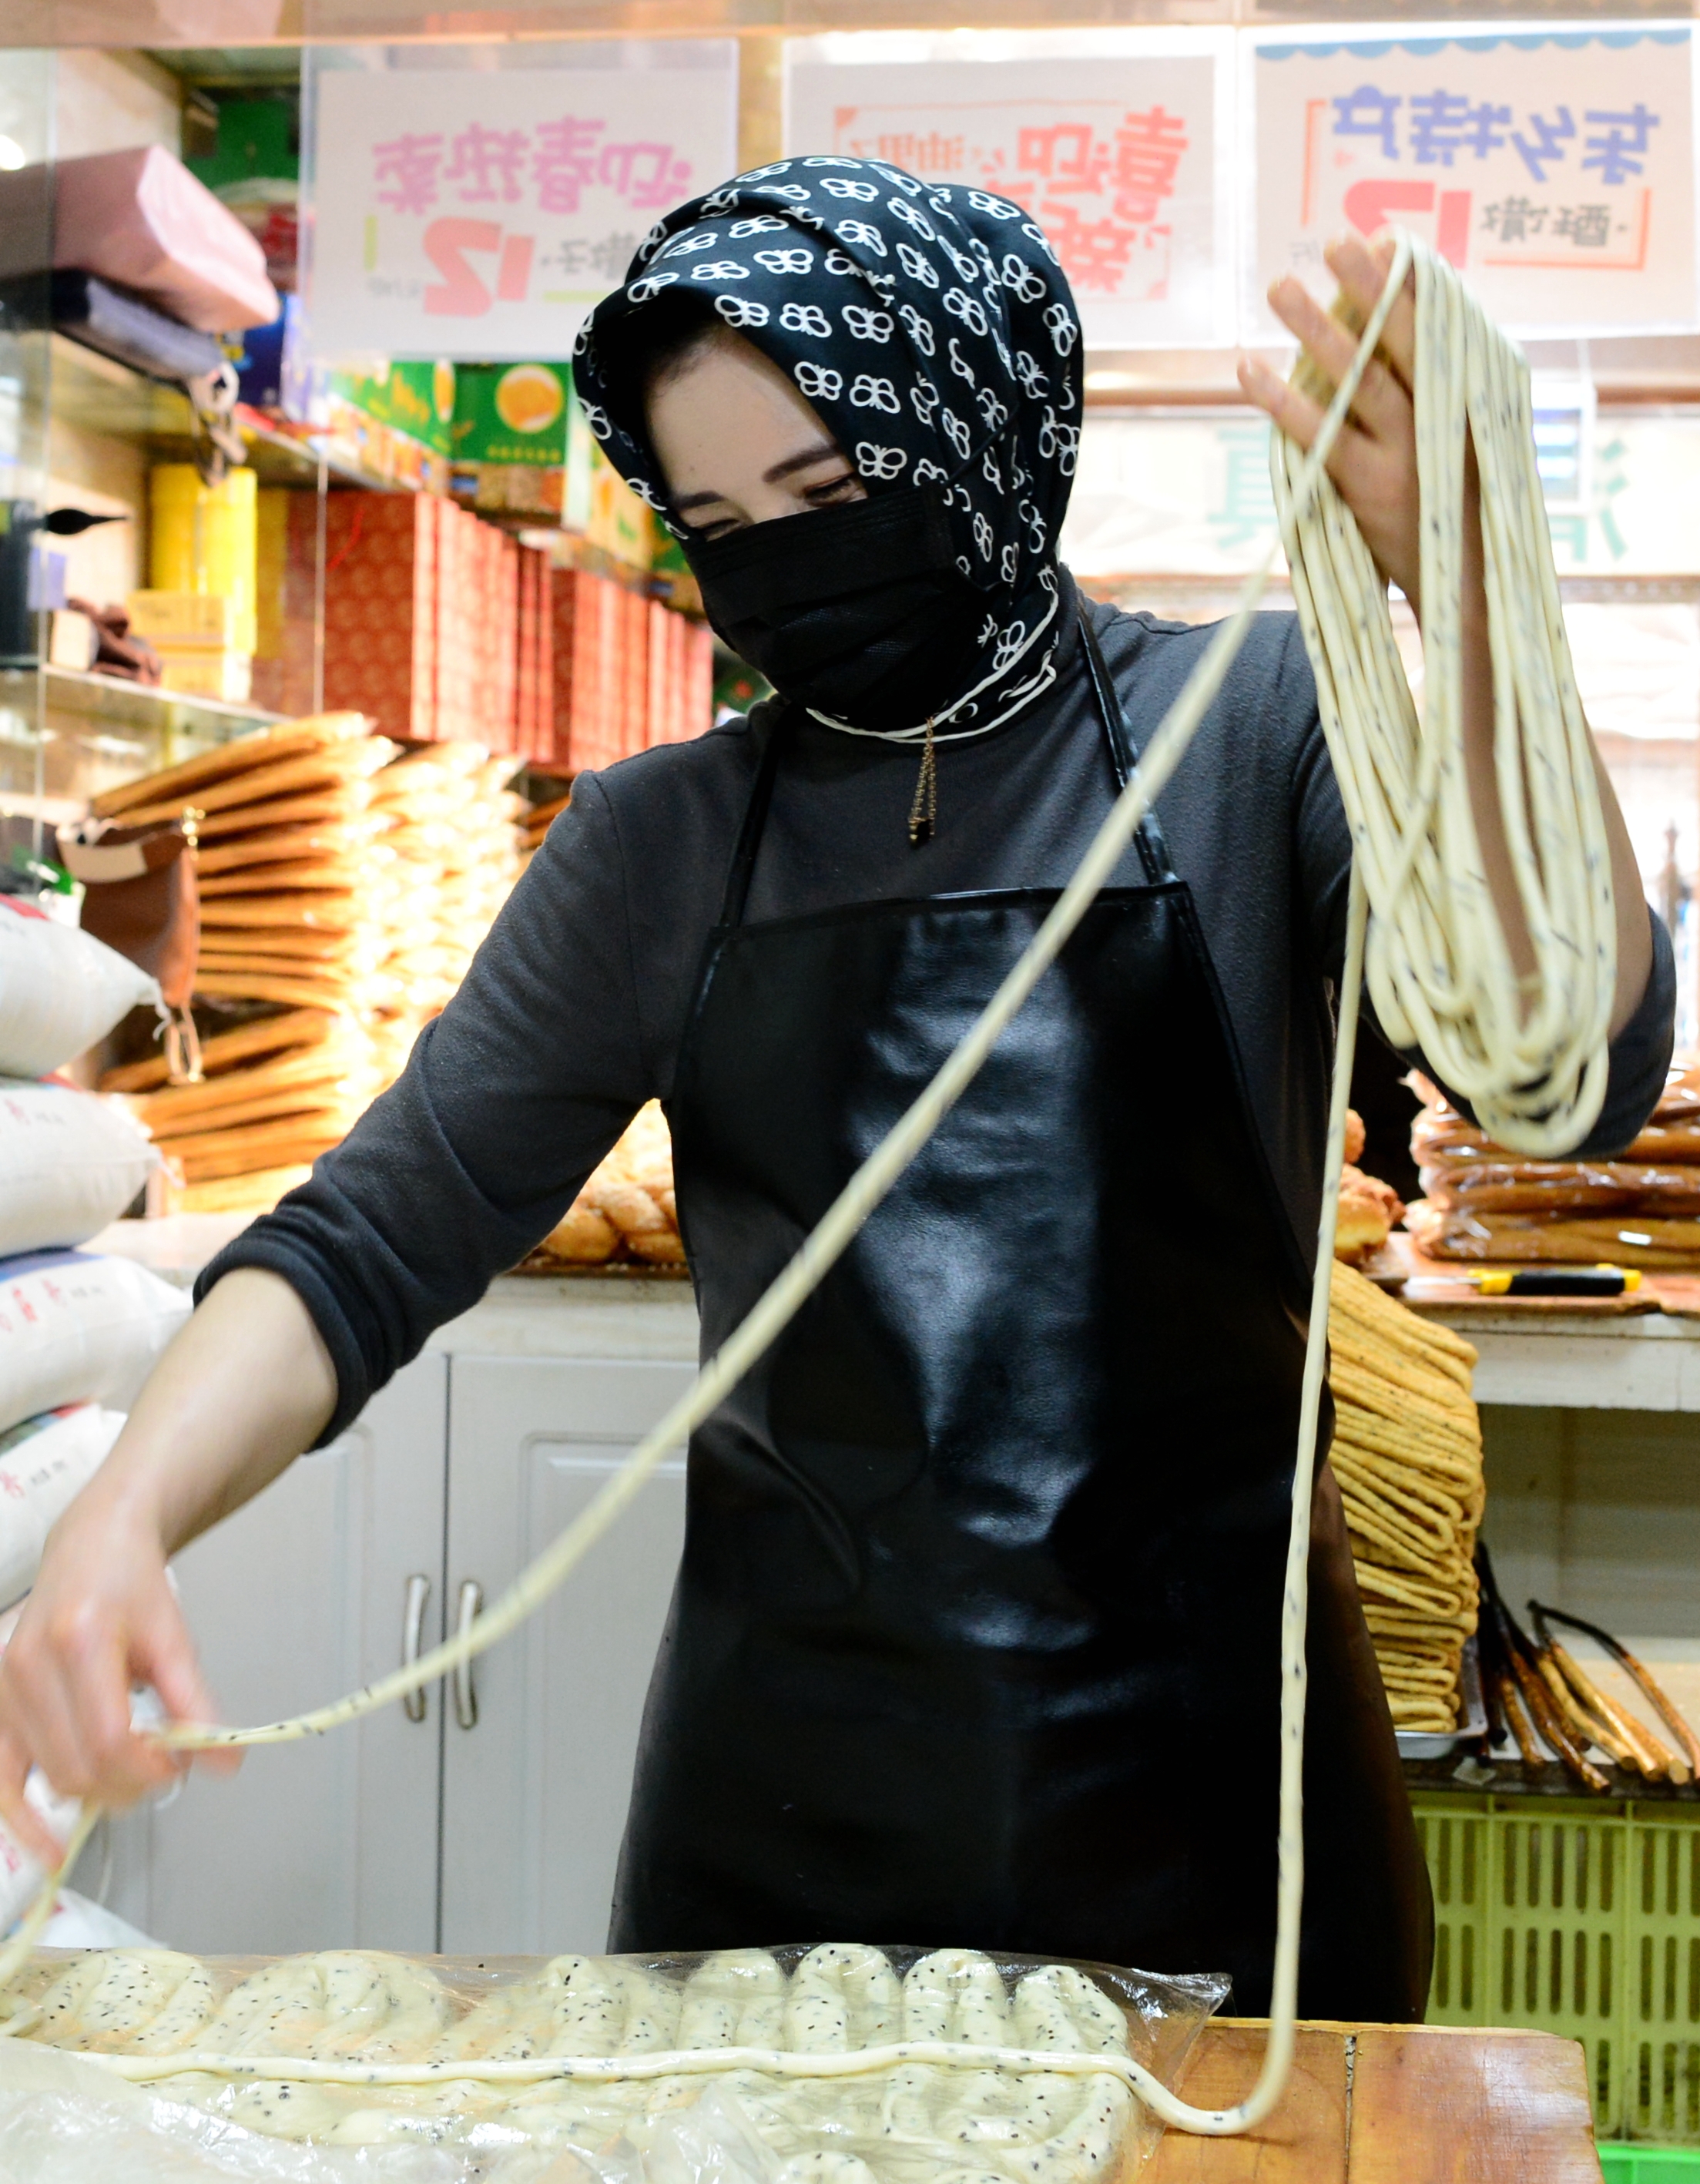 A file photo shows a chef in Lanzhou, Gansu Province makes sanzi, or fried dough twists. /IC